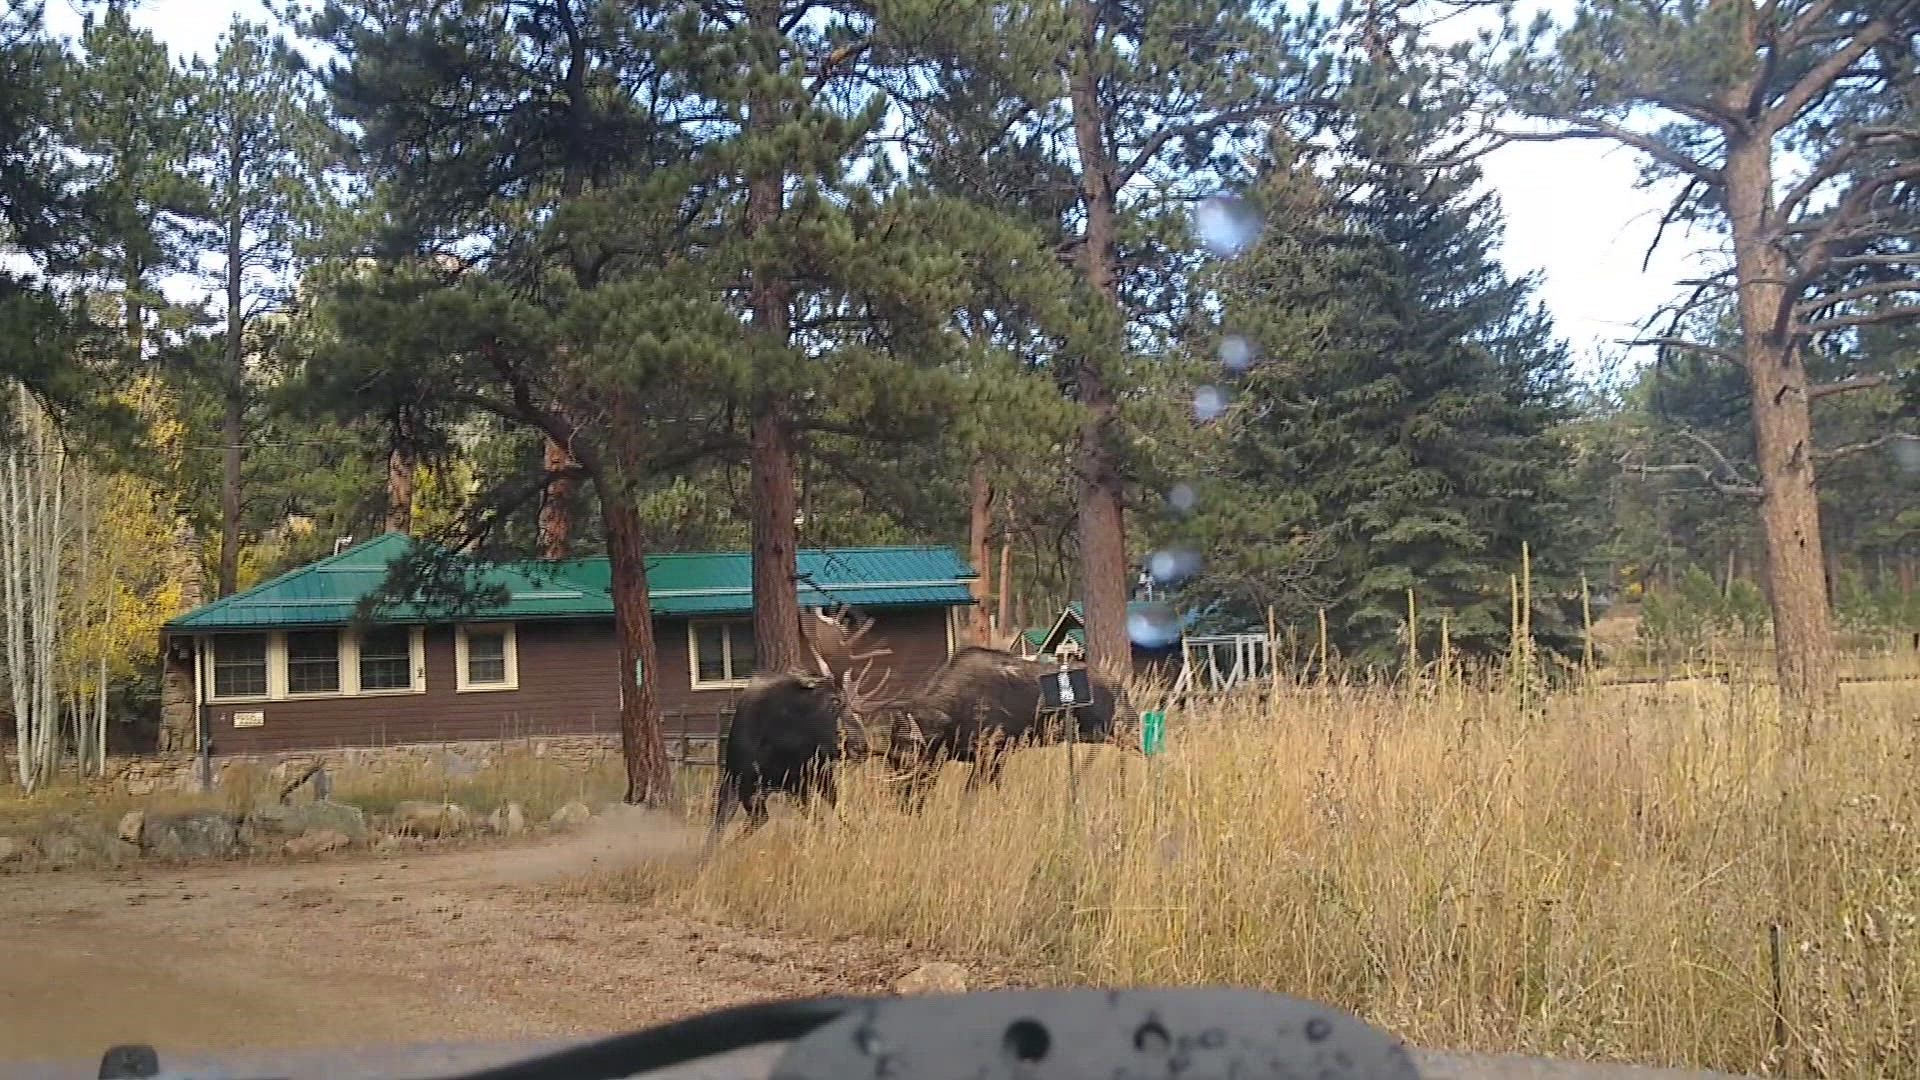 The two bulls went head to head in an epic battle in the Colorado mountains Saturday.